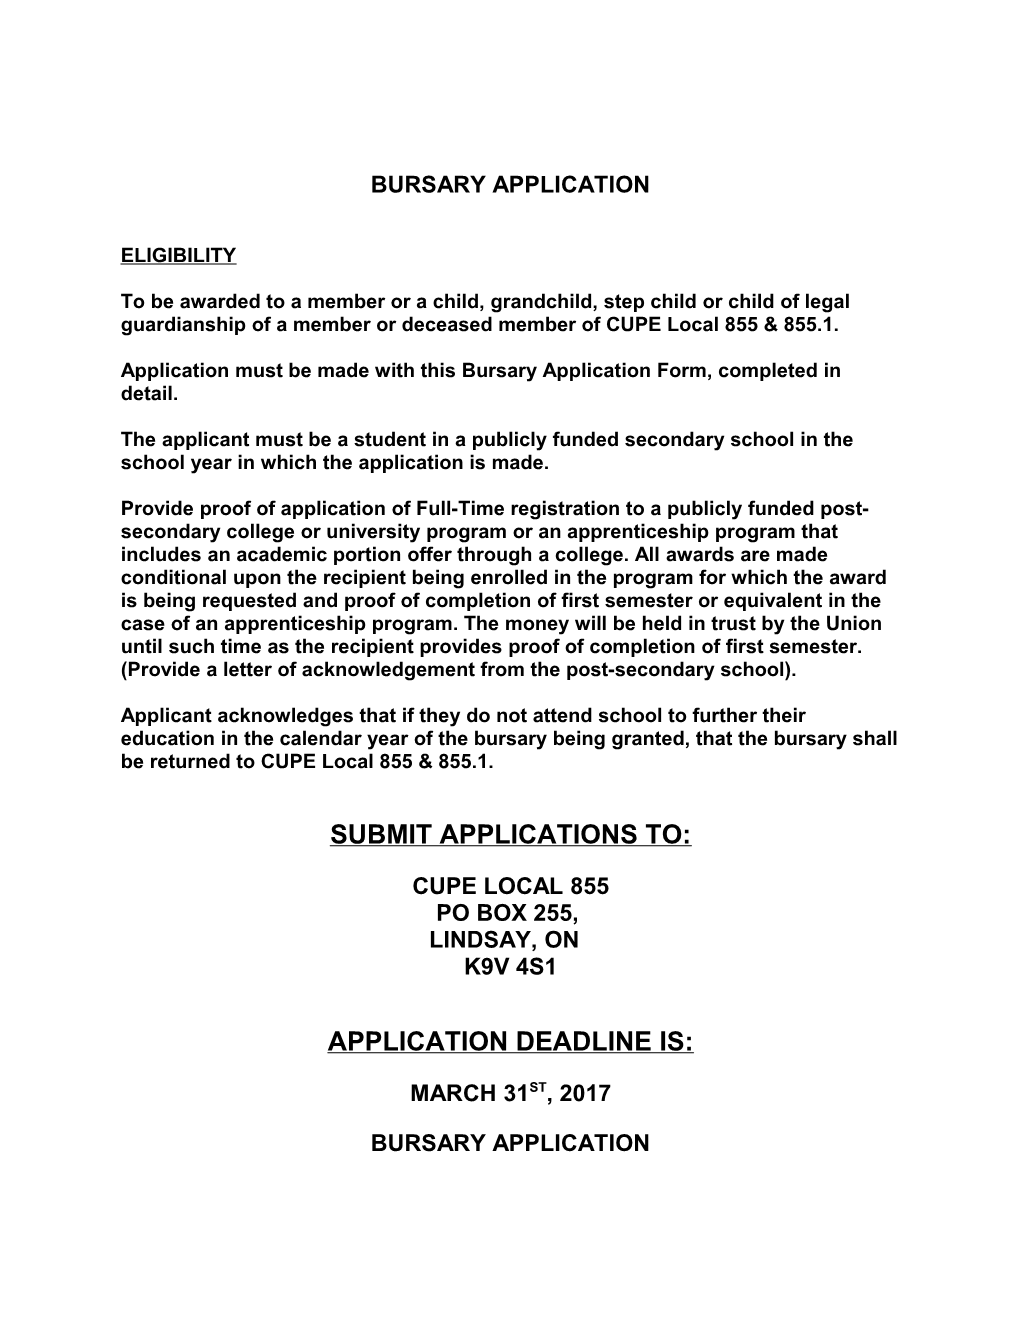 Application Must Be Made with This Bursary Application Form, Completed in Detail